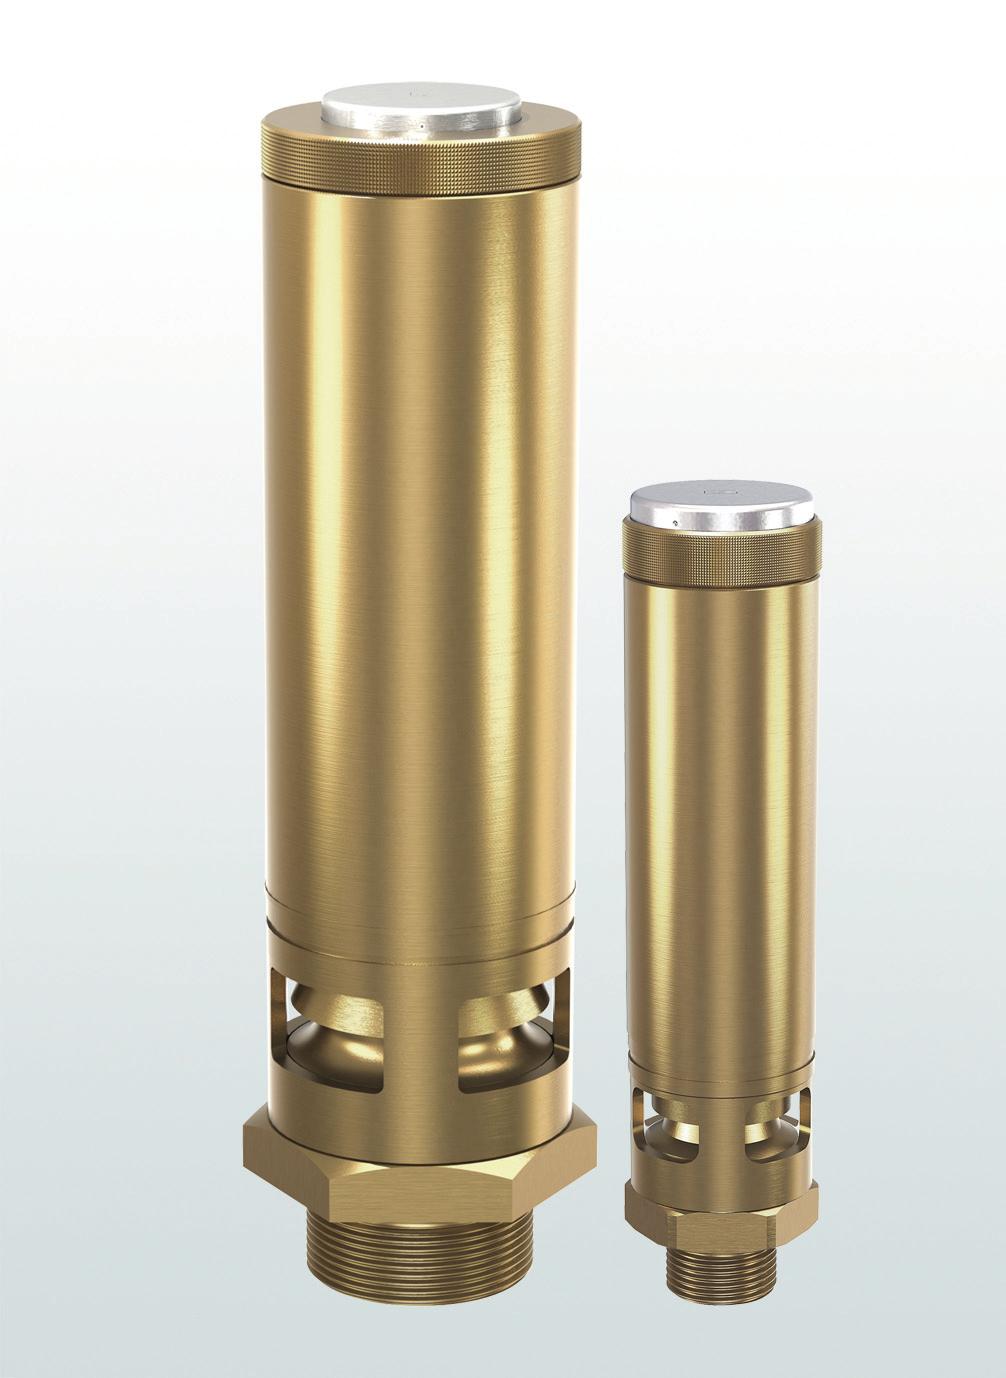 TÜV/CE atmospheric discharge safety valves for industrial applications Series 812 4.